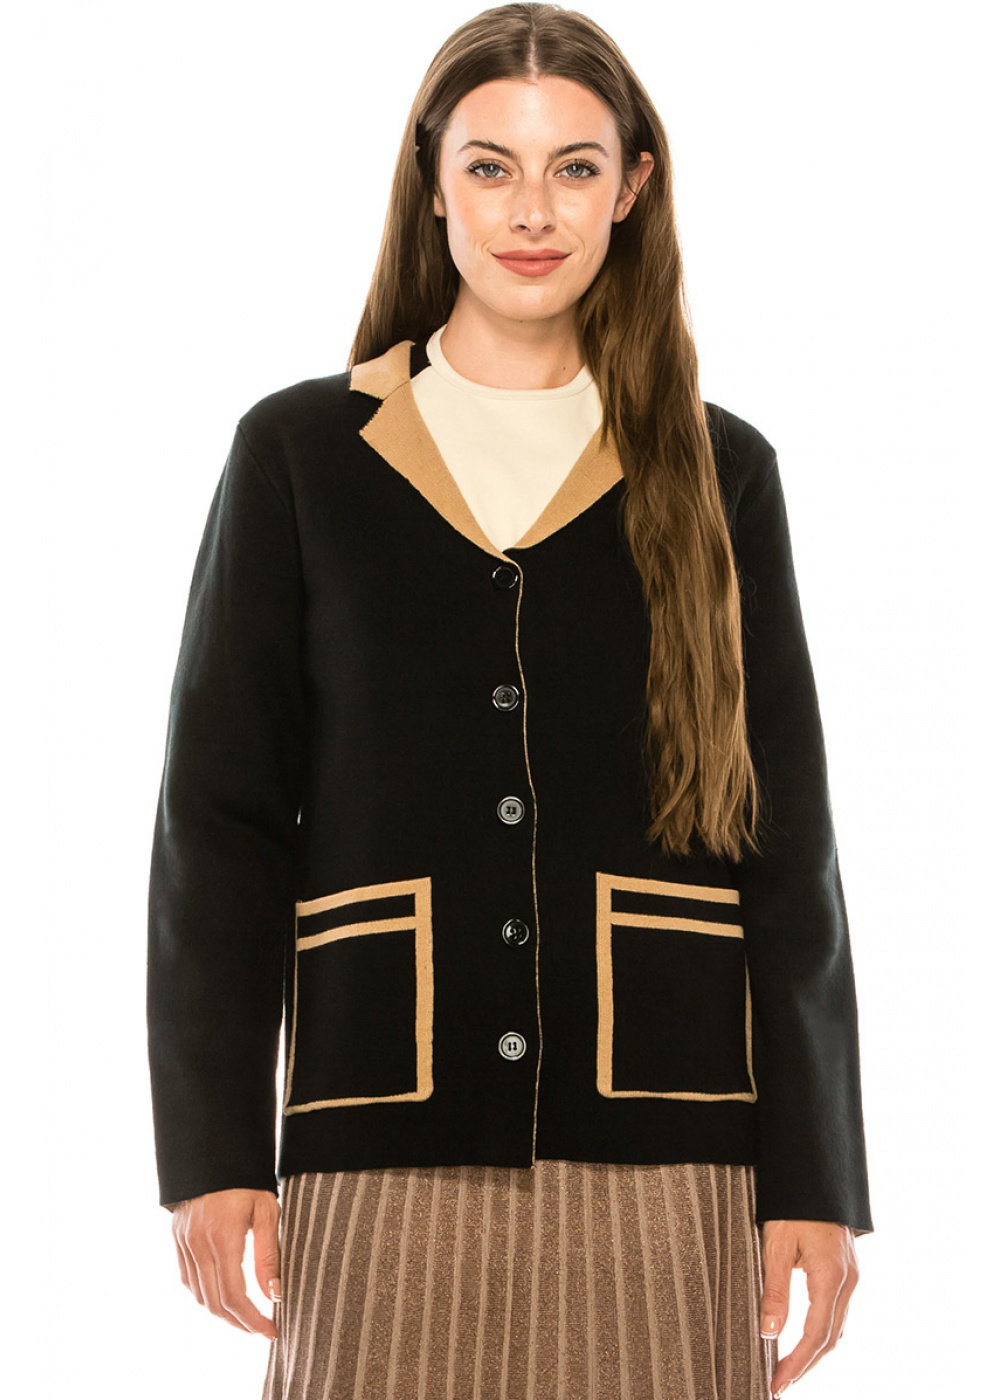 Two-colored buttoned cardigan with turndown collar